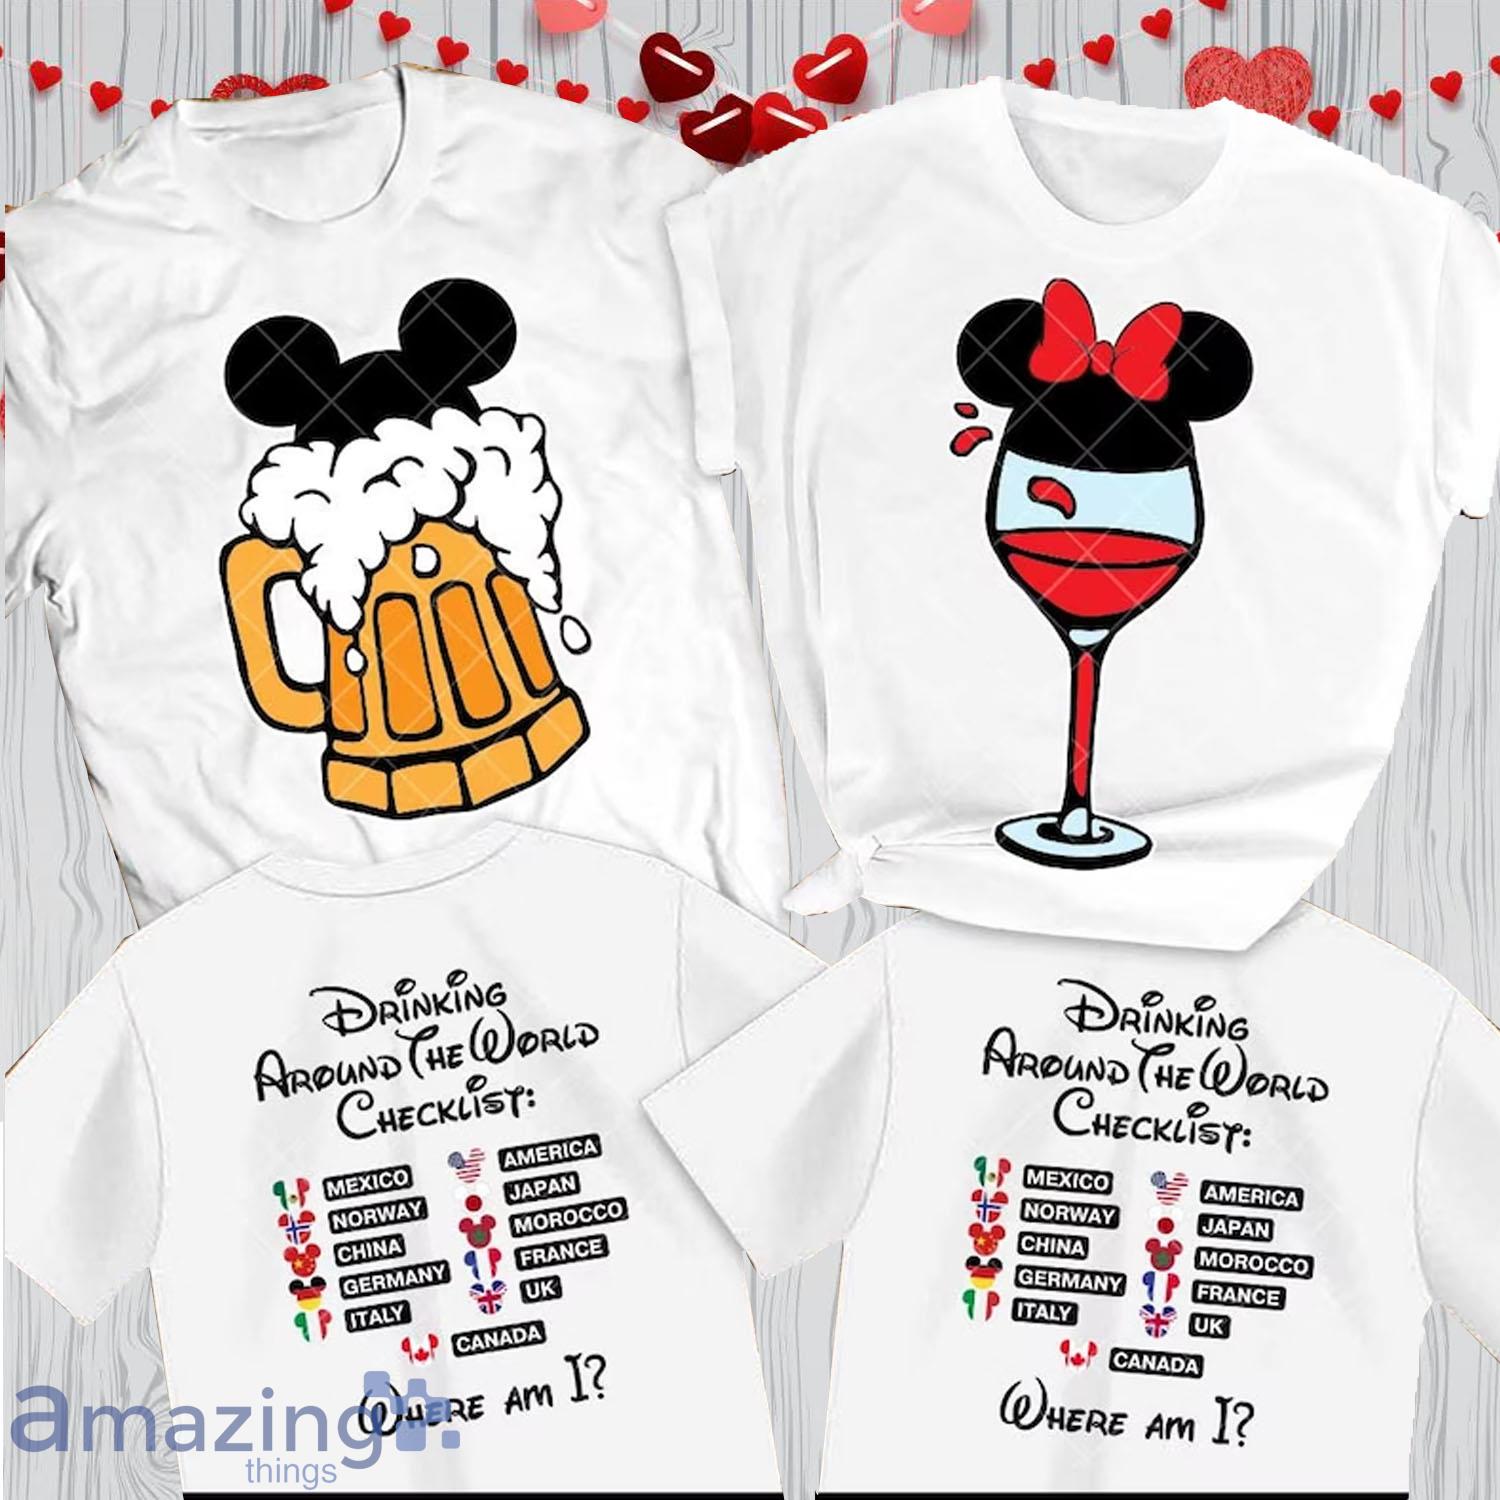 https://image.whatamazingthings.com/2023/01/mickey-beer-minnie-wine-disney-front-and-back-valentines-day-matching-couple-shirt.jpg